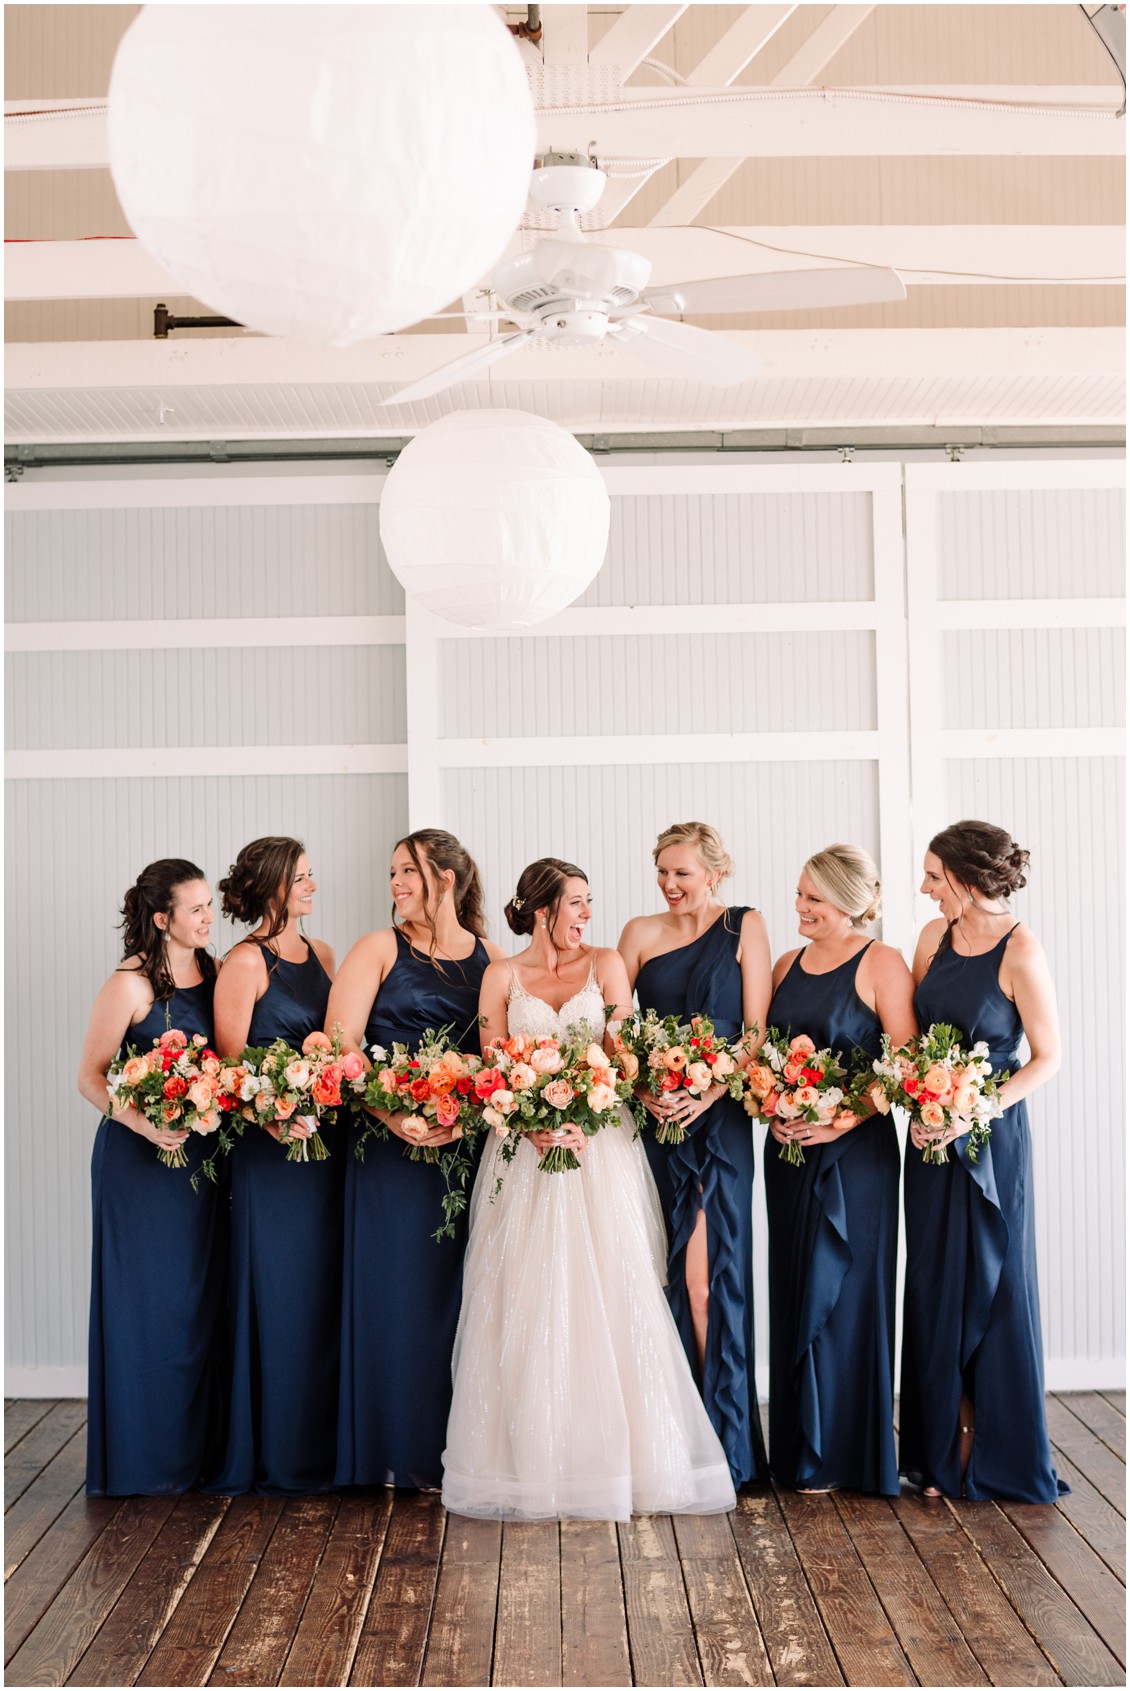 Bride and bridesmaids in dark blue dresses with bright bouquets at bayside celebration | My Eastern Shore Wedding | Chesapeake Bay Beach Club